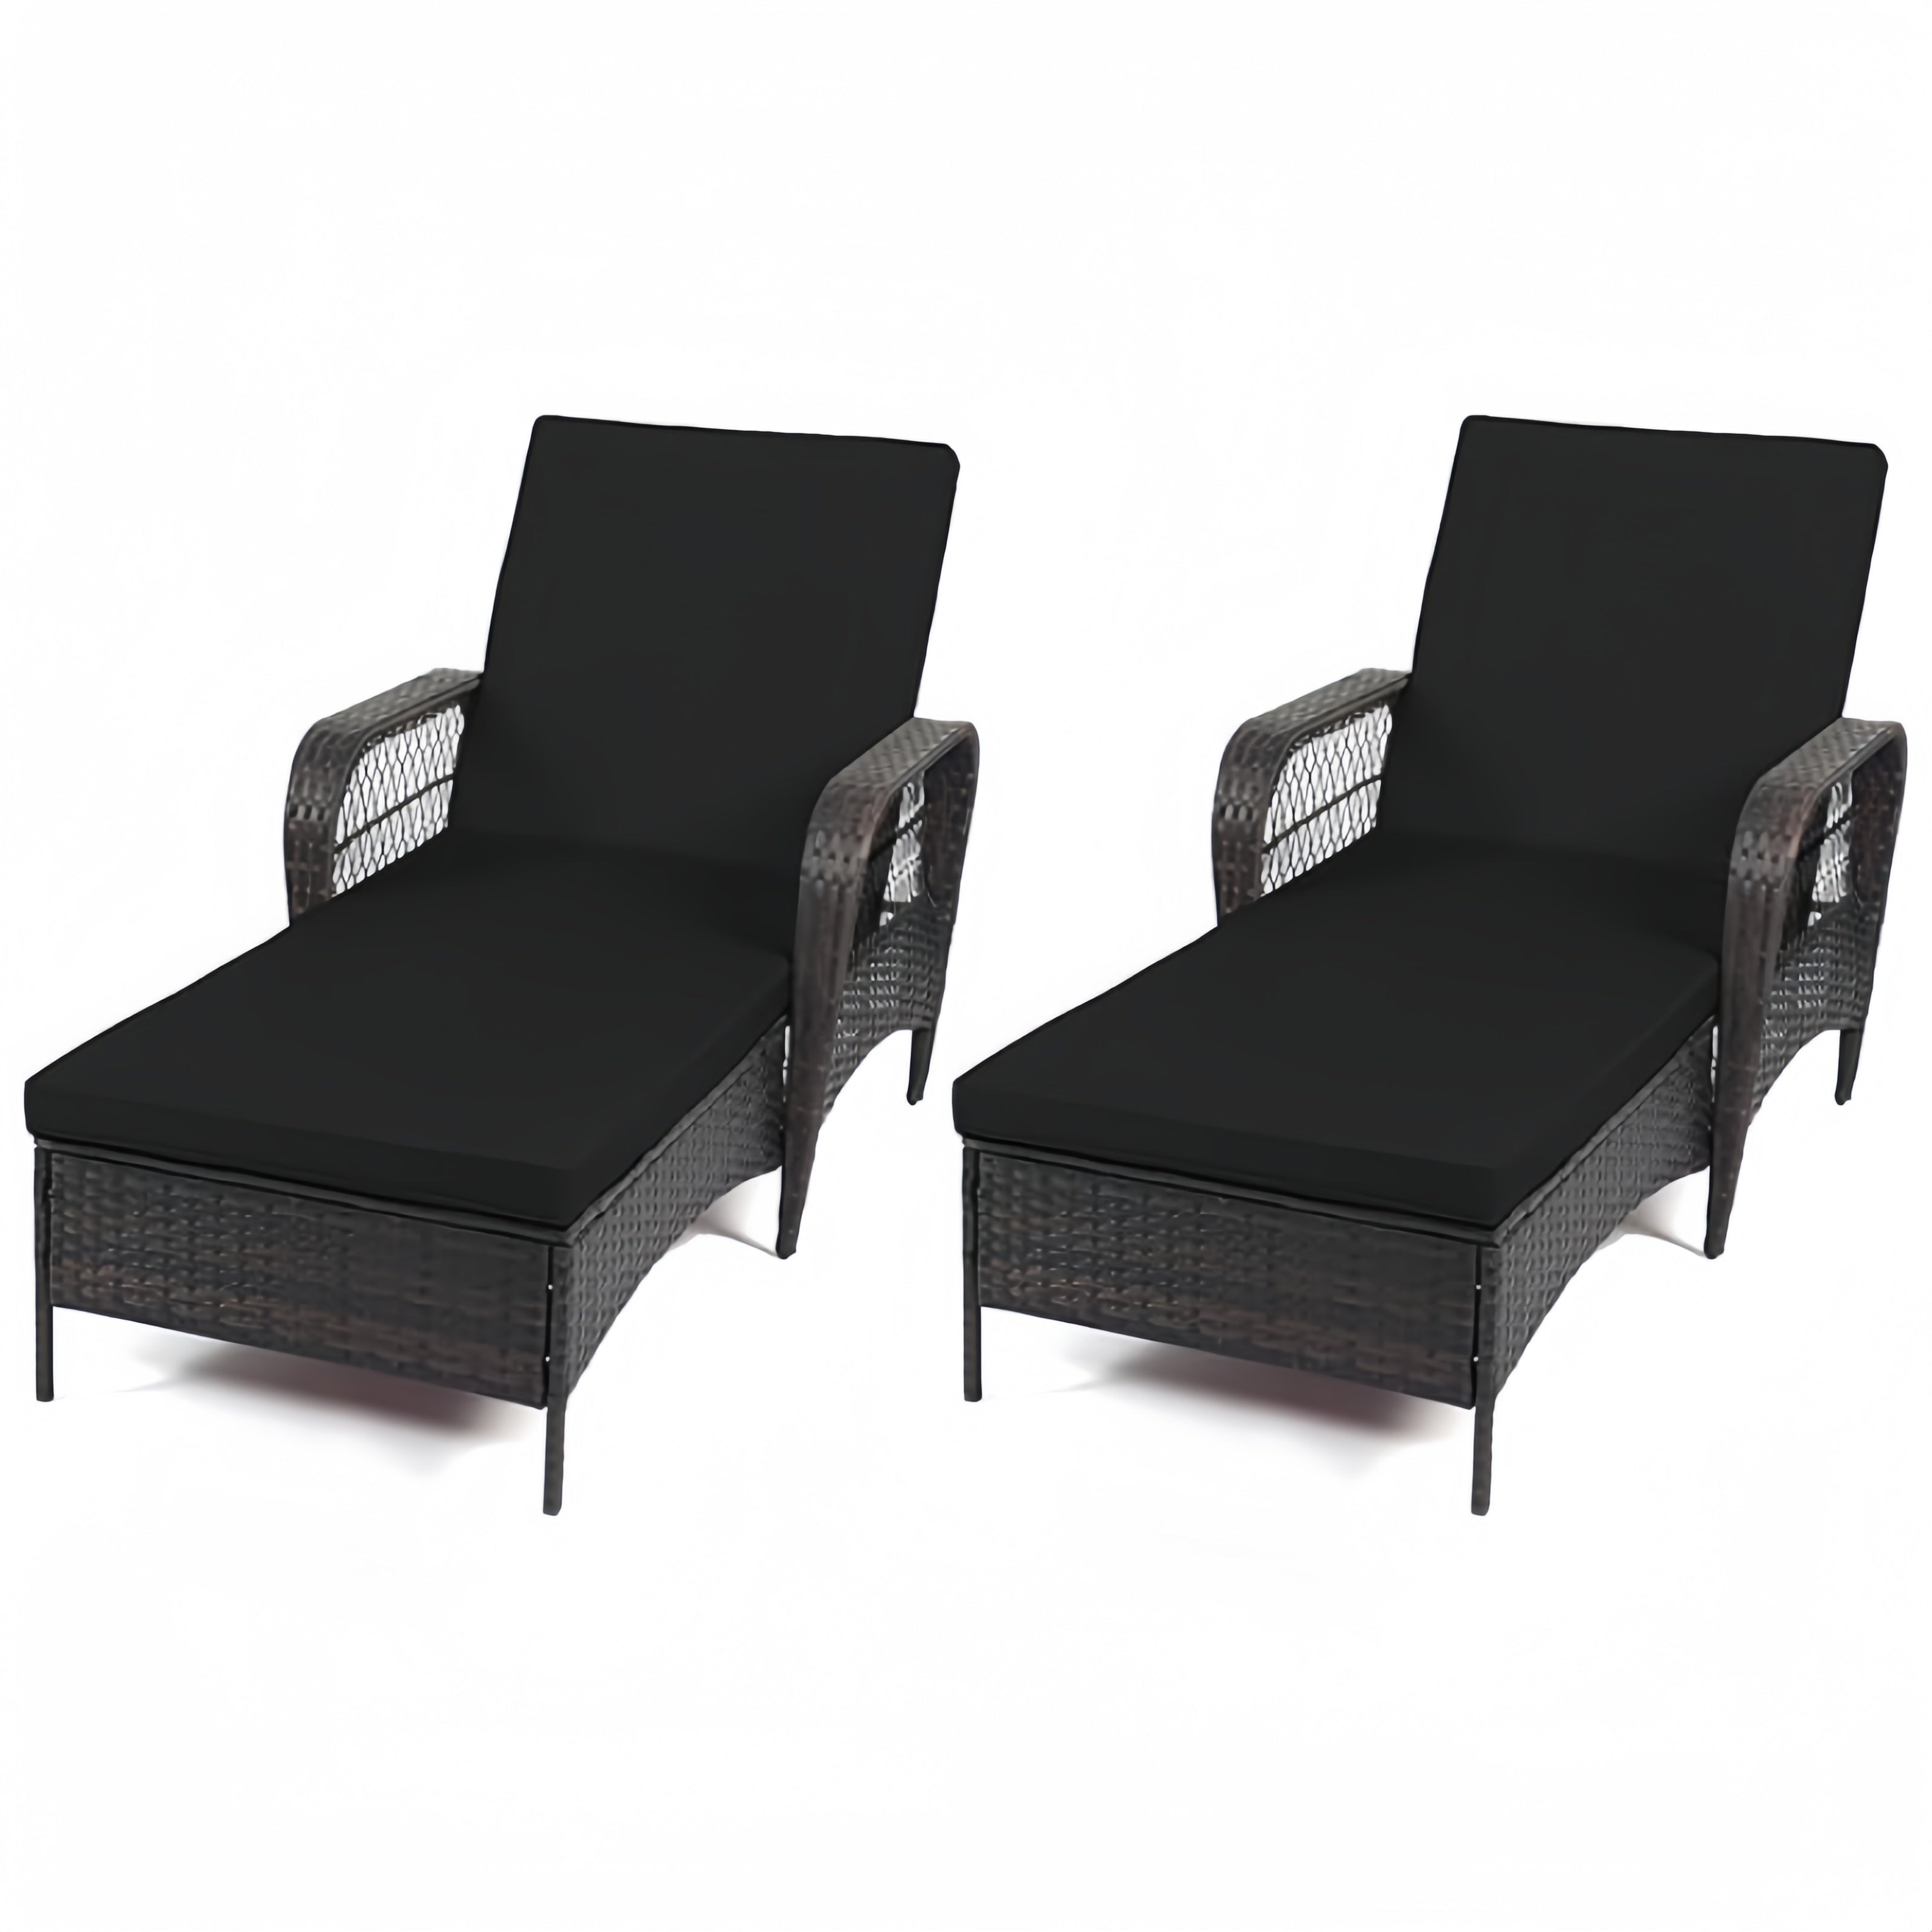 Rattan Outdoor Patio Lounge Chair with 6 Adjustable Positions, Armrests, and Padded Cushions